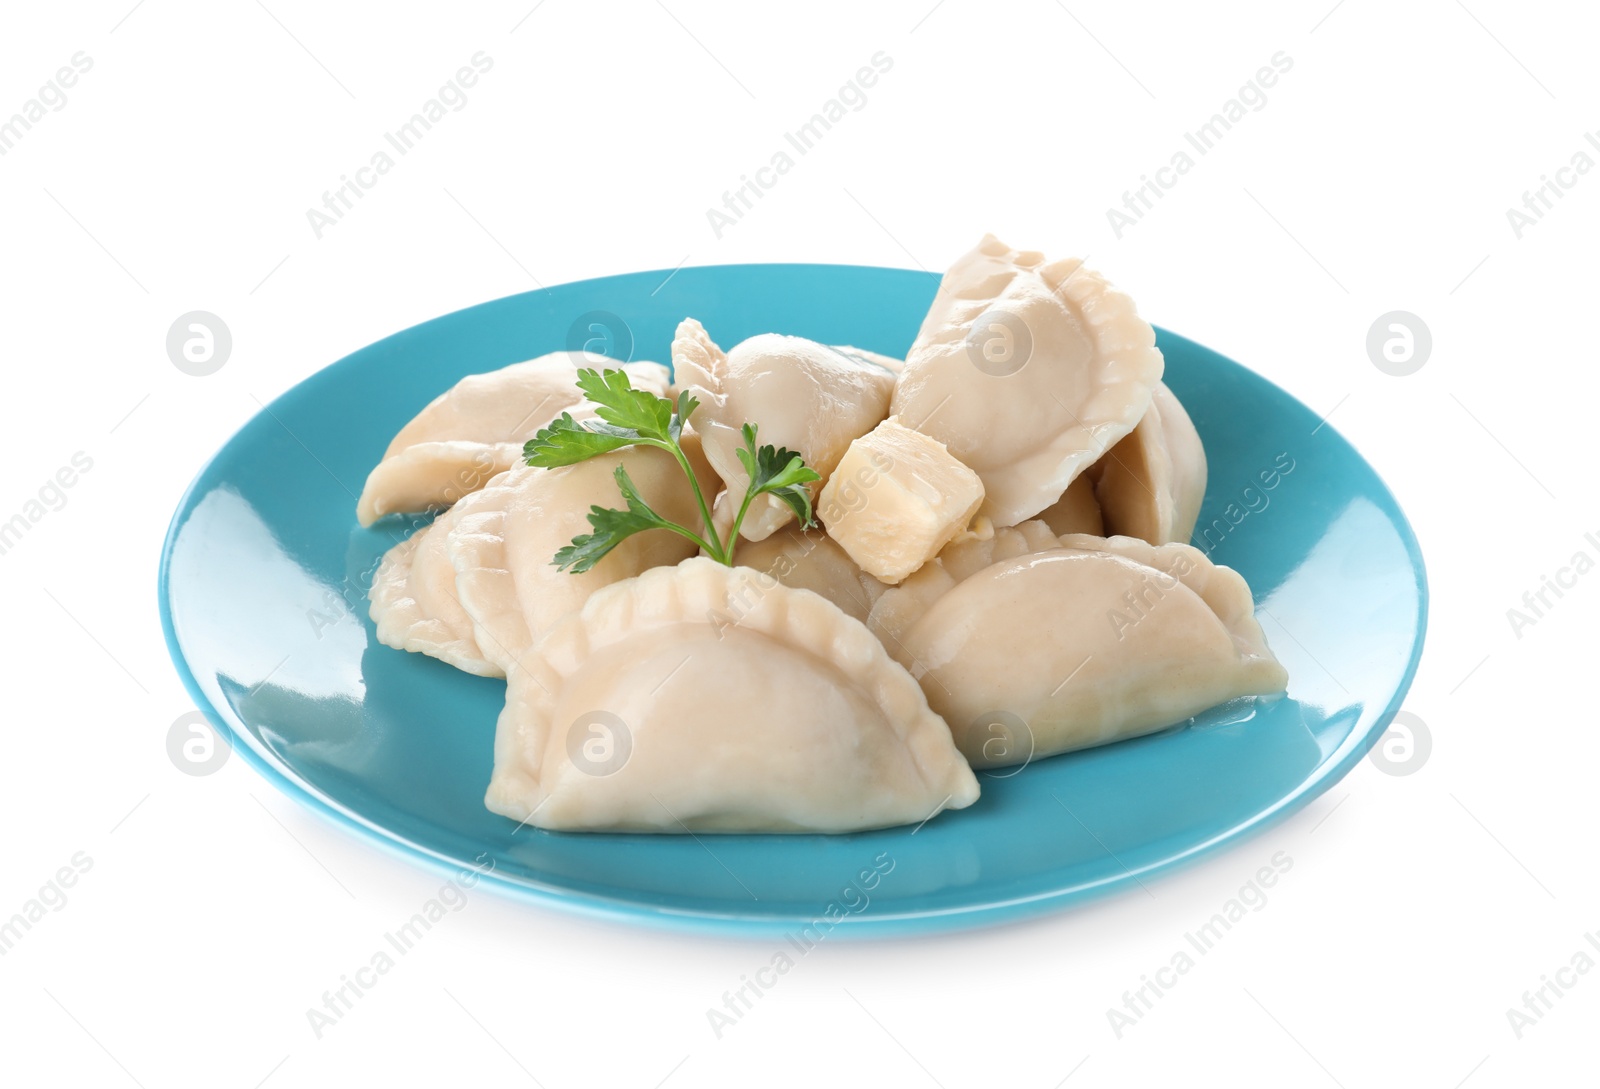 Photo of Plate of tasty dumplings served with parsley and butter on white background